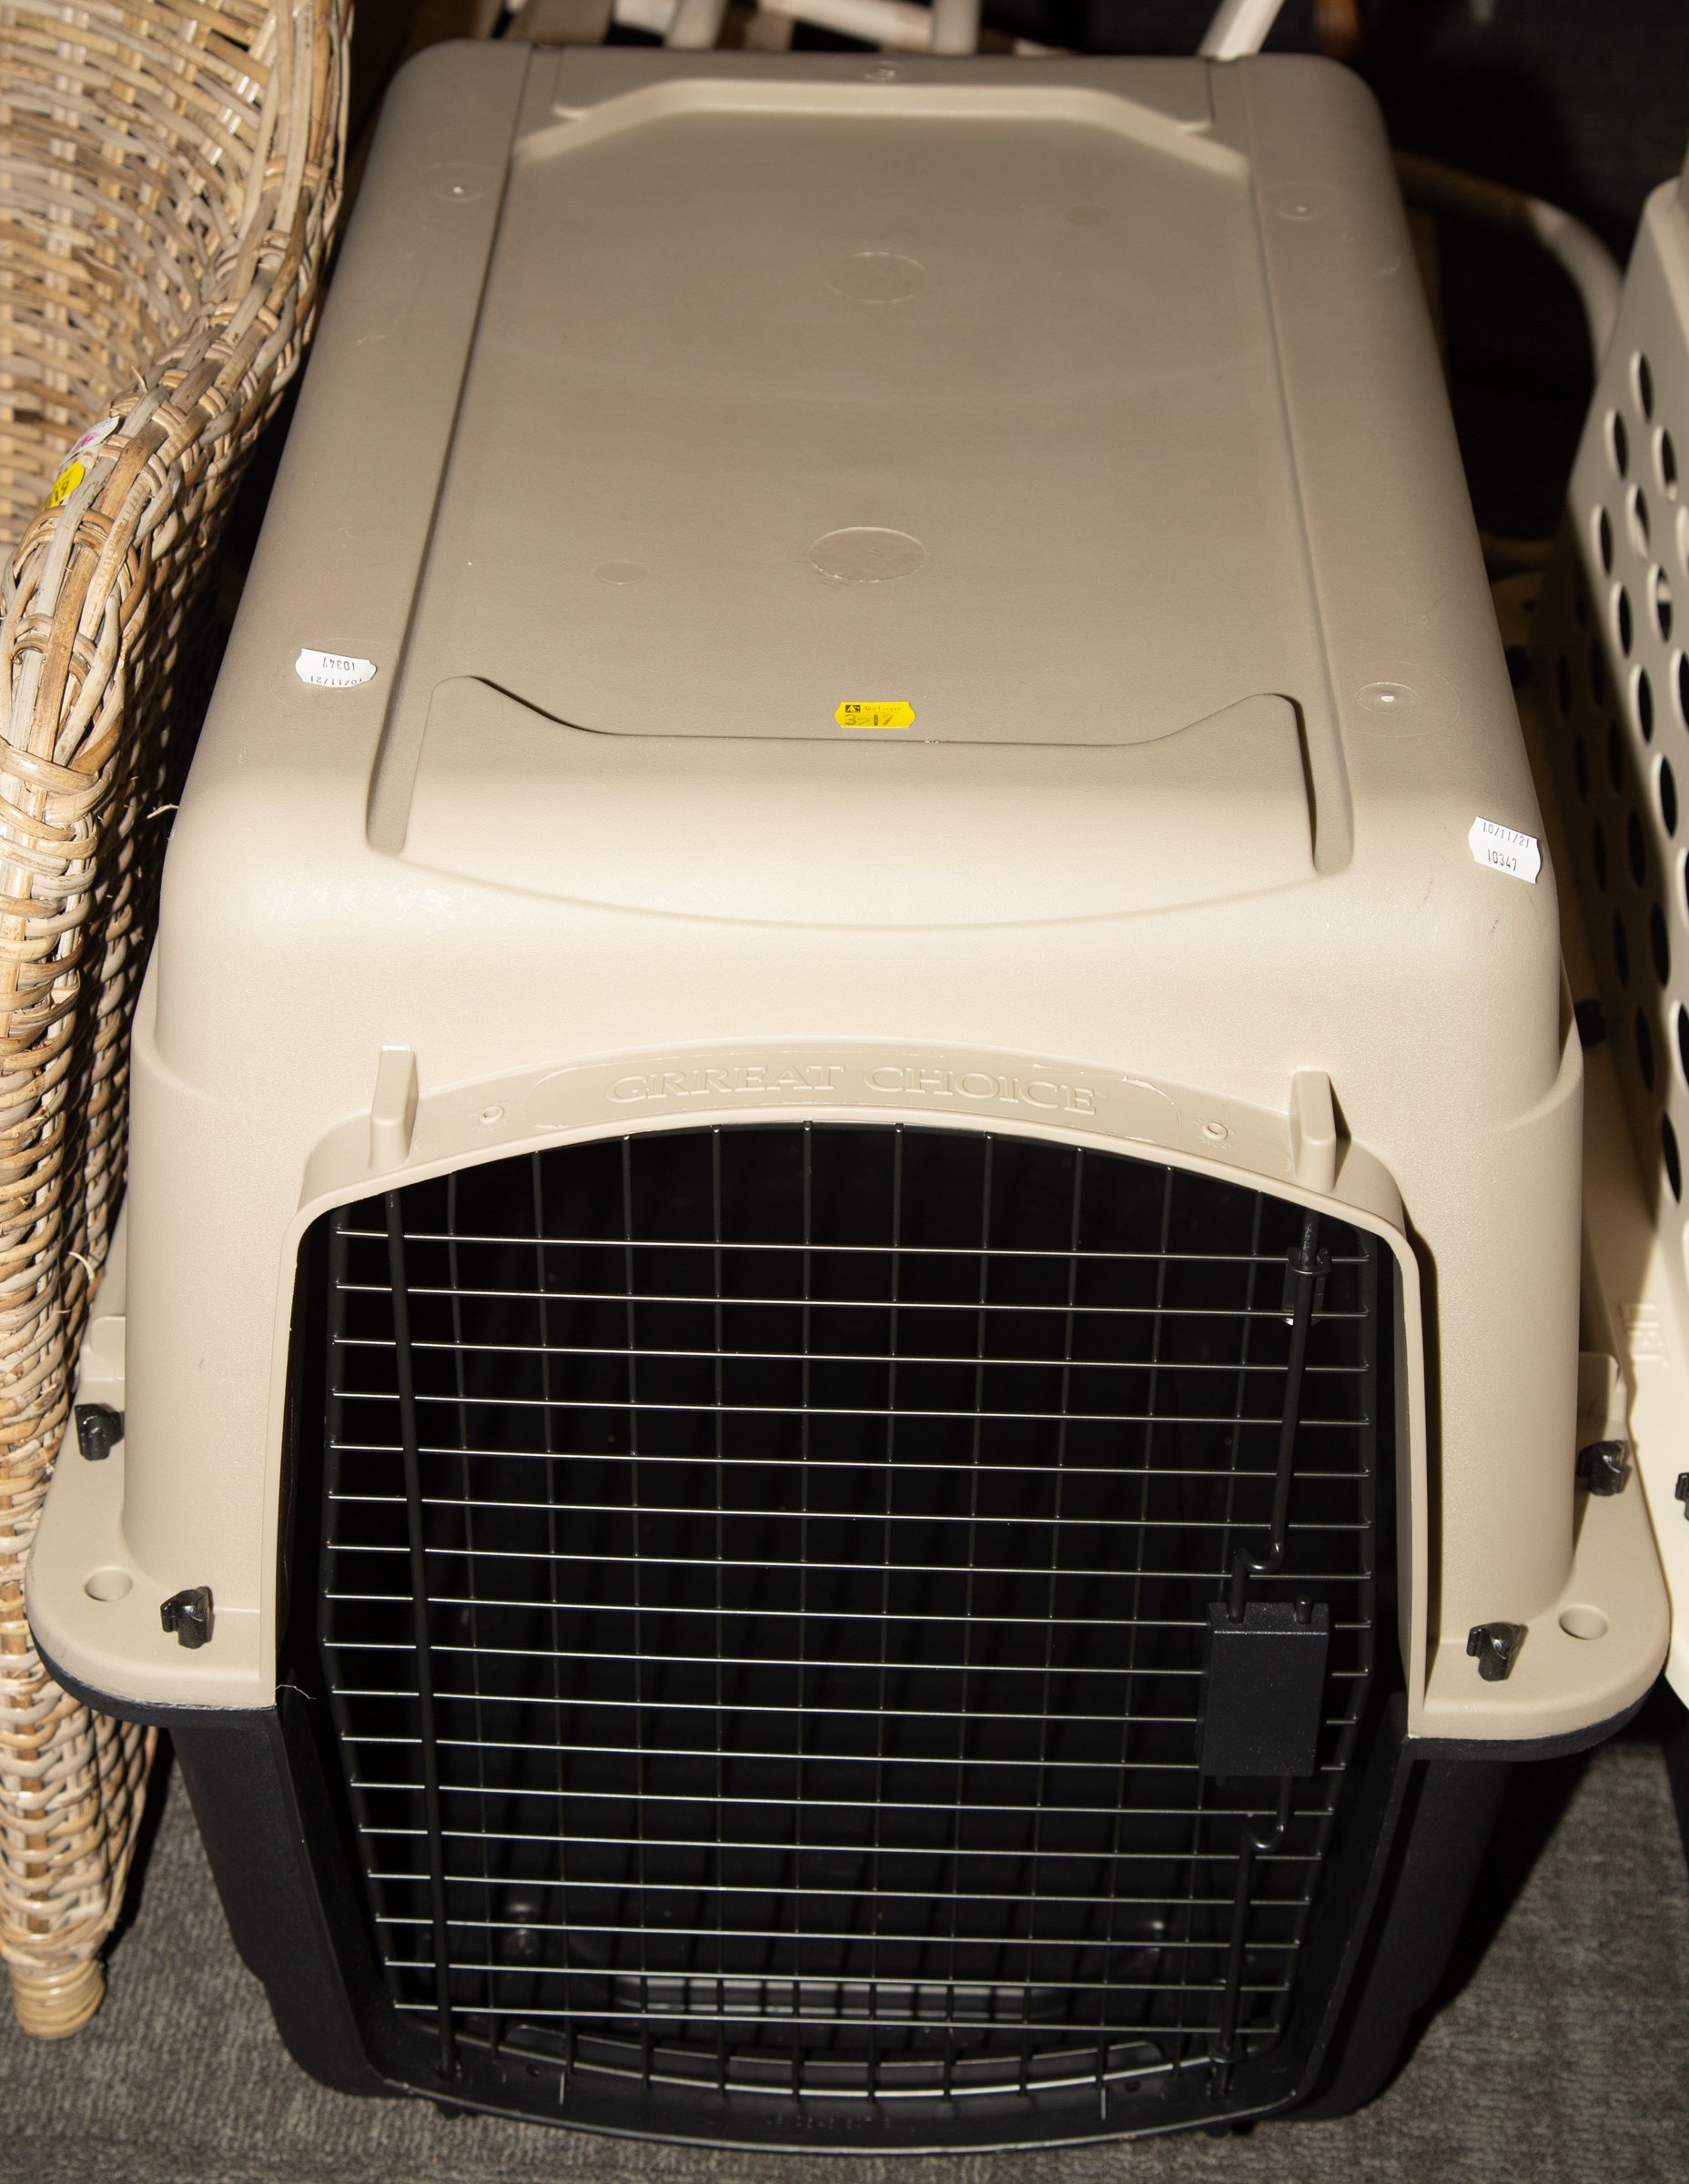 LARGE AIRLINE STYLE DOG CRATE "Great